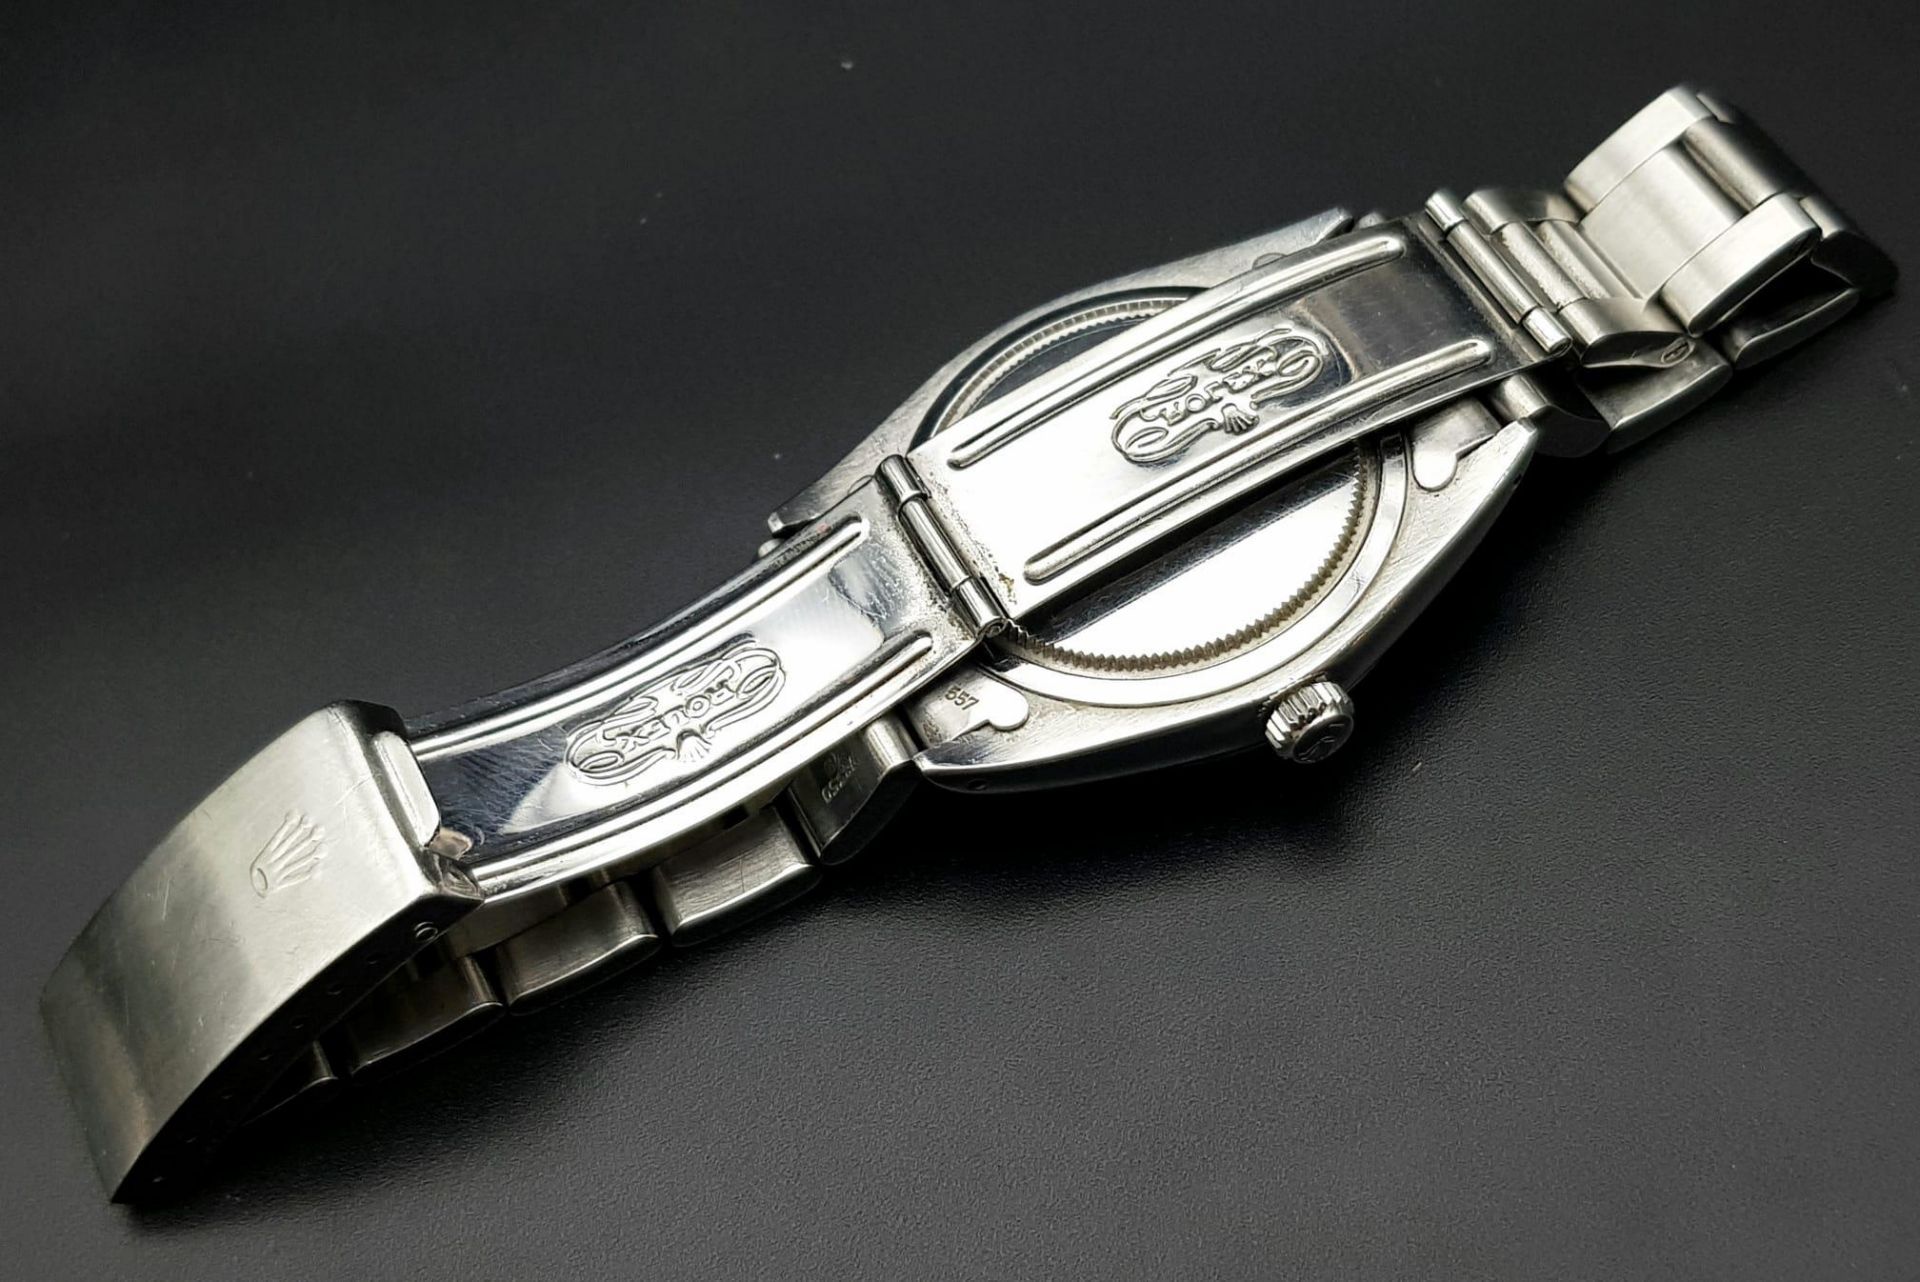 A Vintage Rolex Oysterdate Precision Mid-Size Watch. Stainless steel bracelet and case - 35mm. - Image 6 of 9